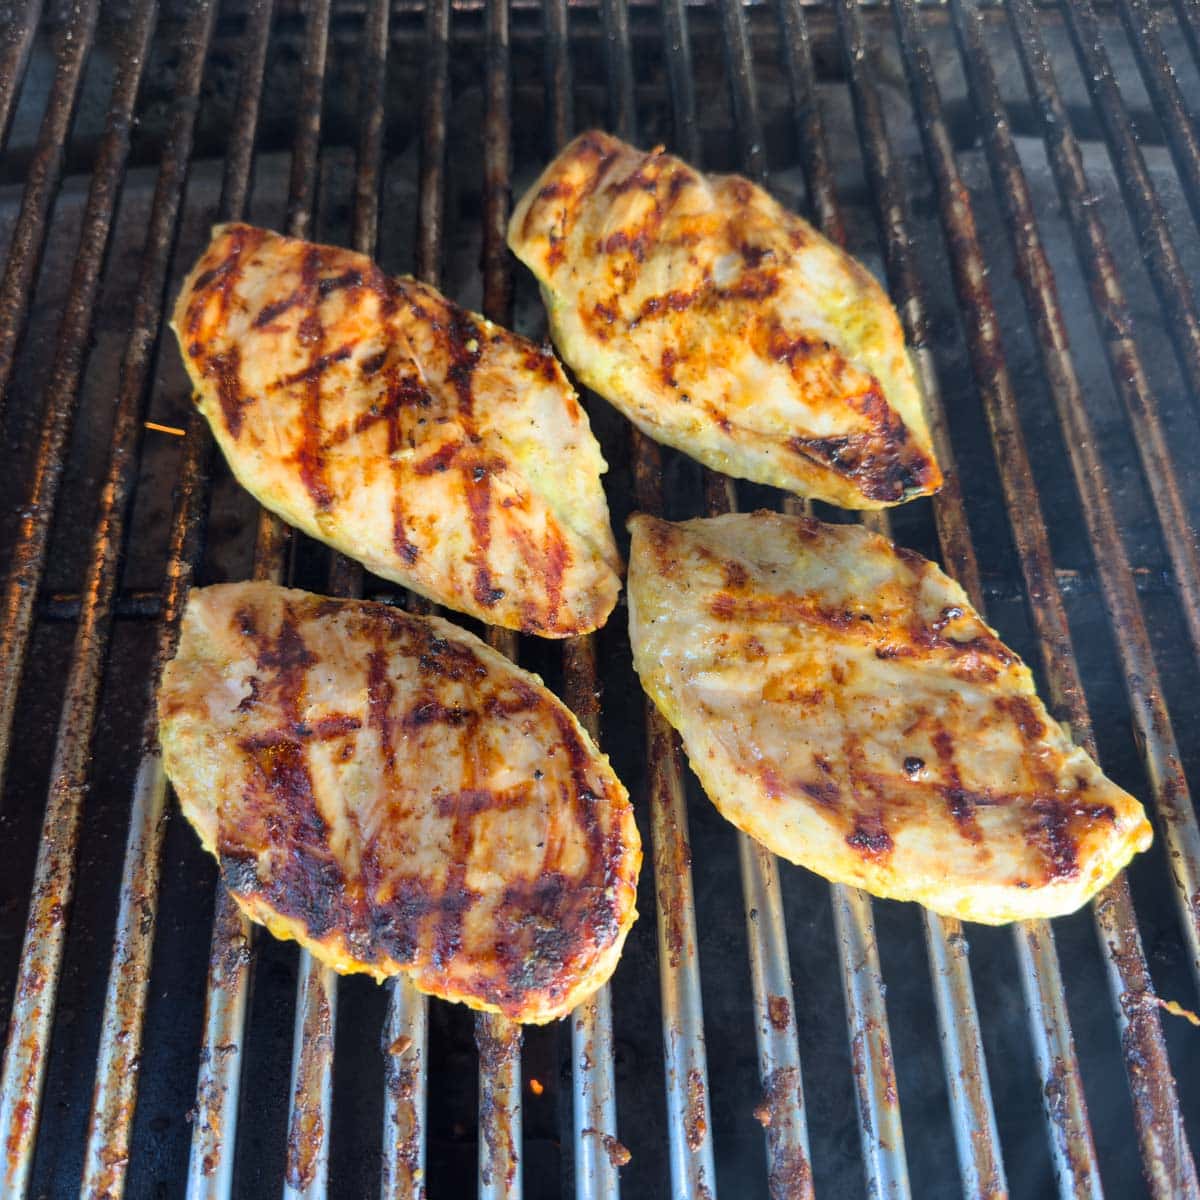 Grilled chicken breasts on the grill, with nice grill marks.